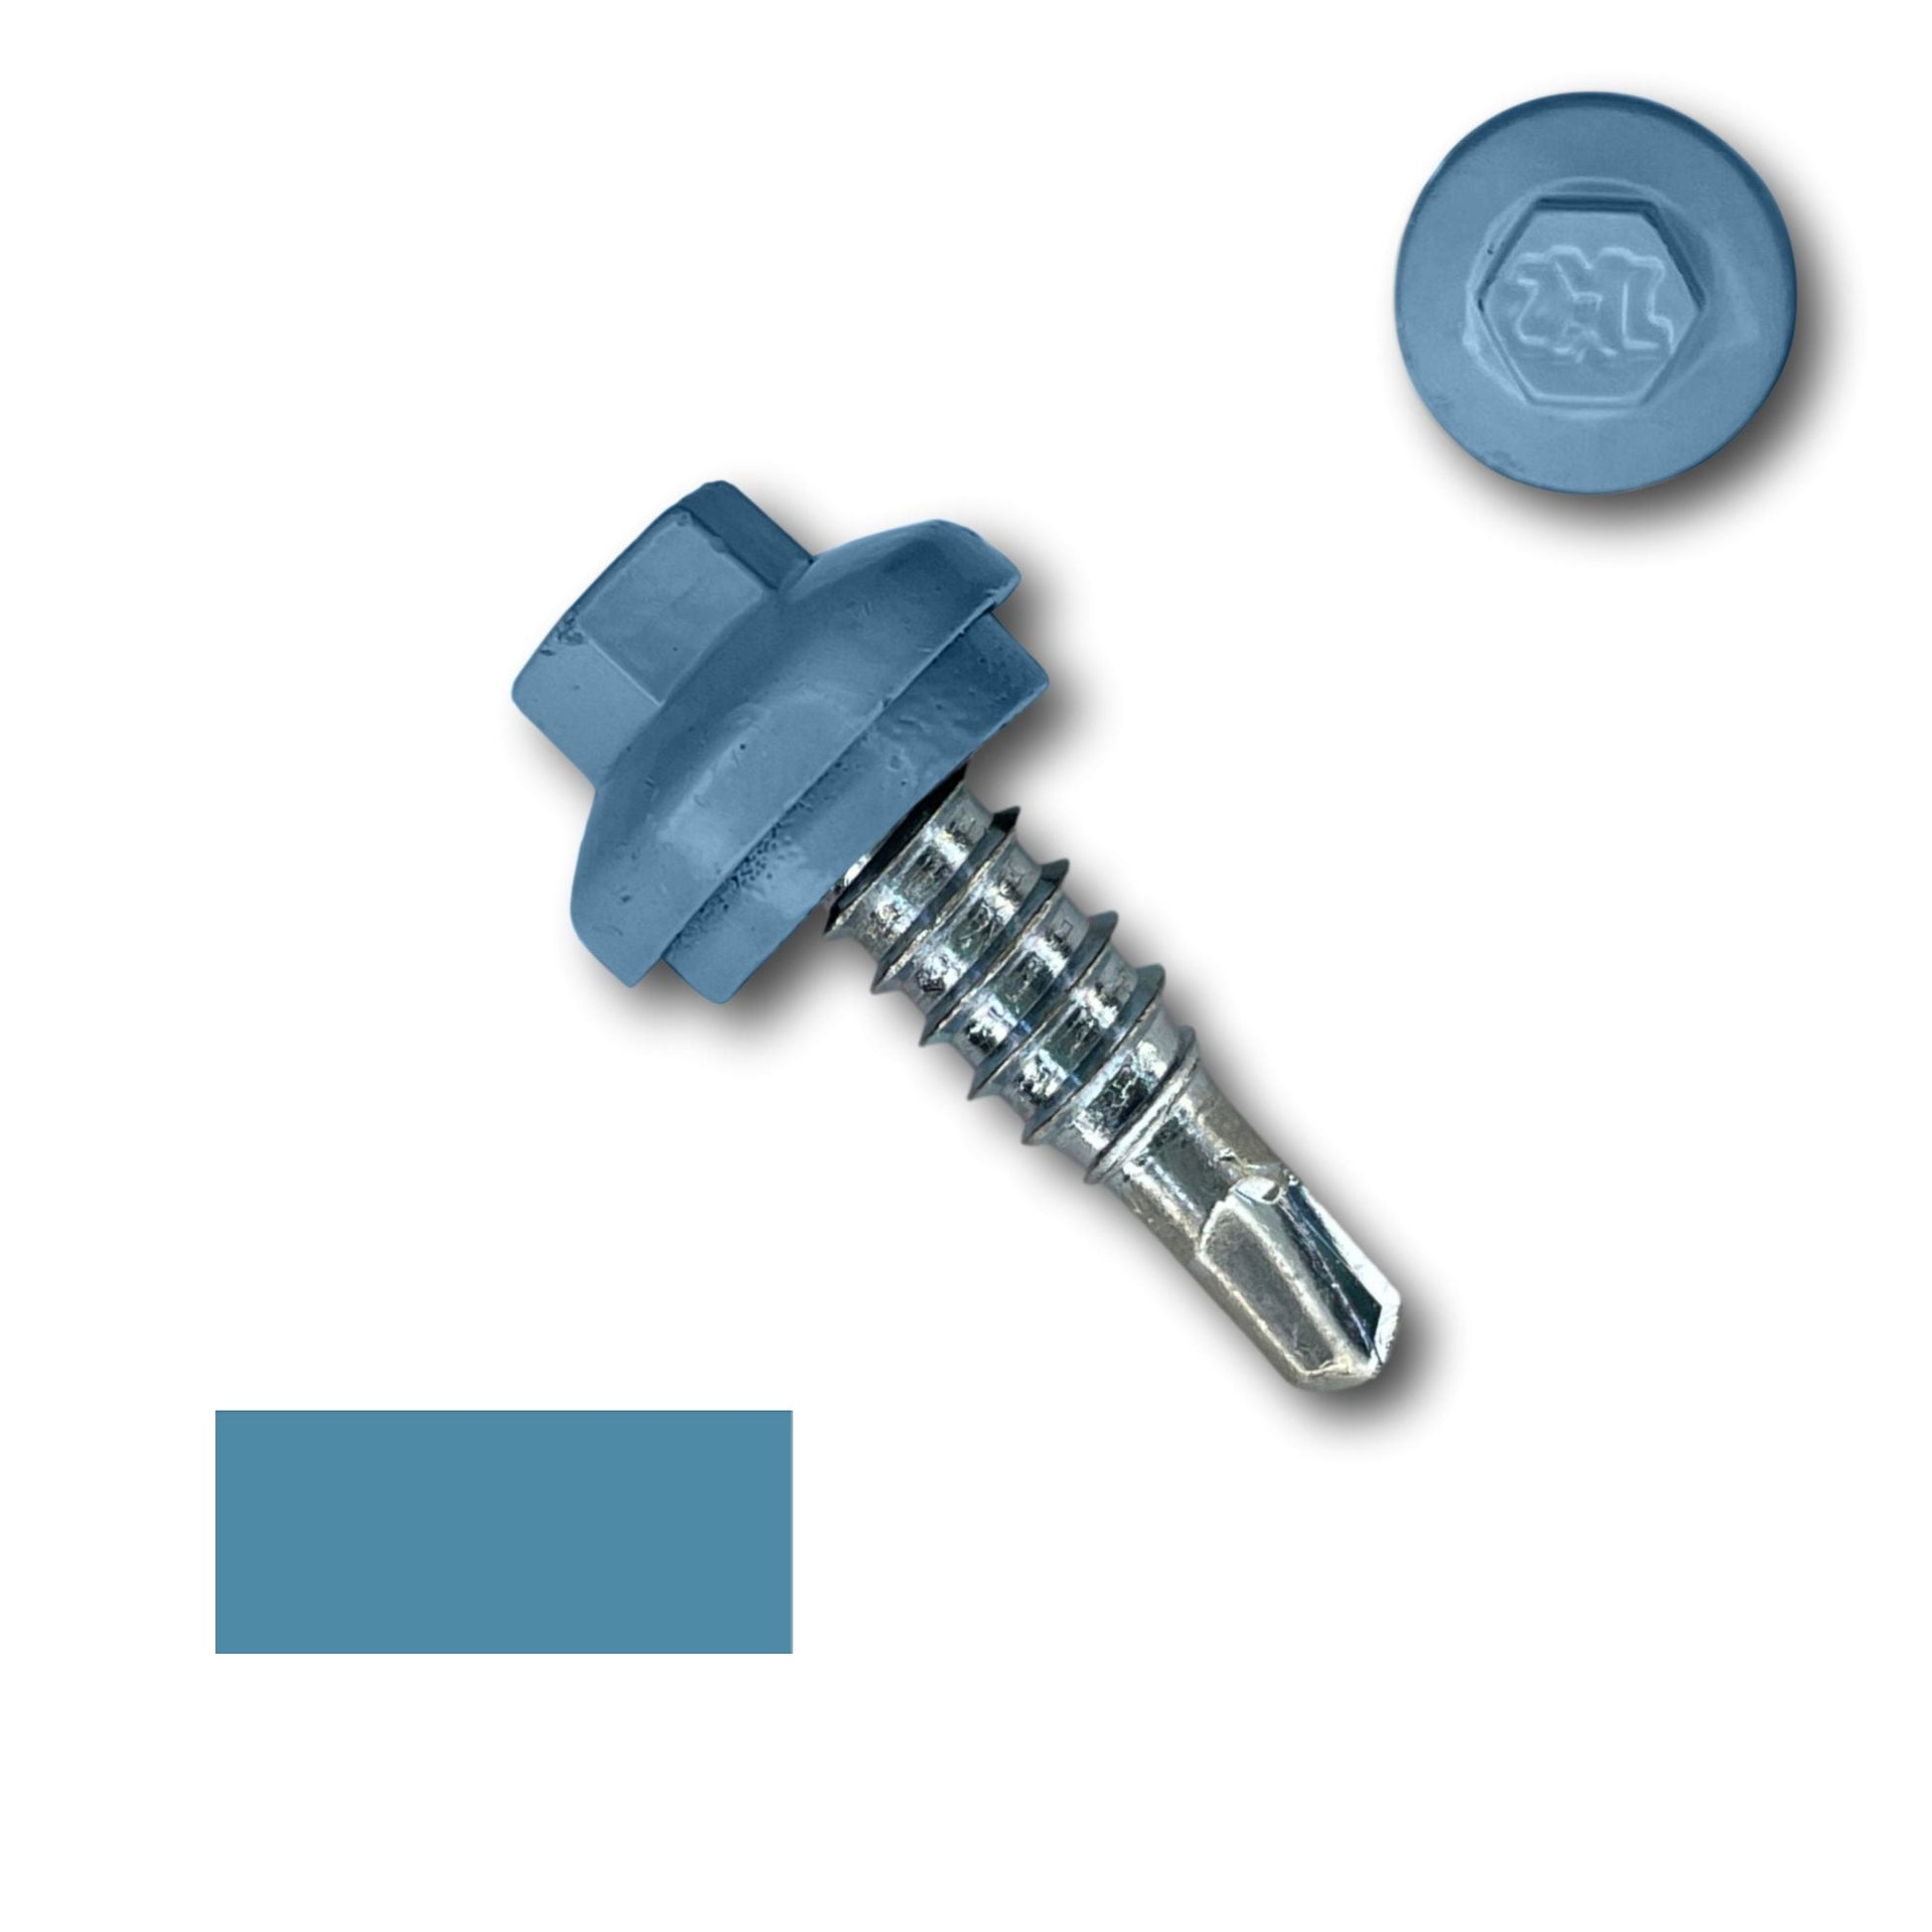 A close-up view of a blue hex washer head self-drilling screw with serrations on the threads, perfect for secure fastening. An identical head is shown separately above it. A solid blue color square is displayed below the screw to highlight its design. The product shown is the Perma Cover #14 x 7/8" Stitch Lap ZXL Dome Cap Metal Building Screws, Self-Drilling - 250 Pack.